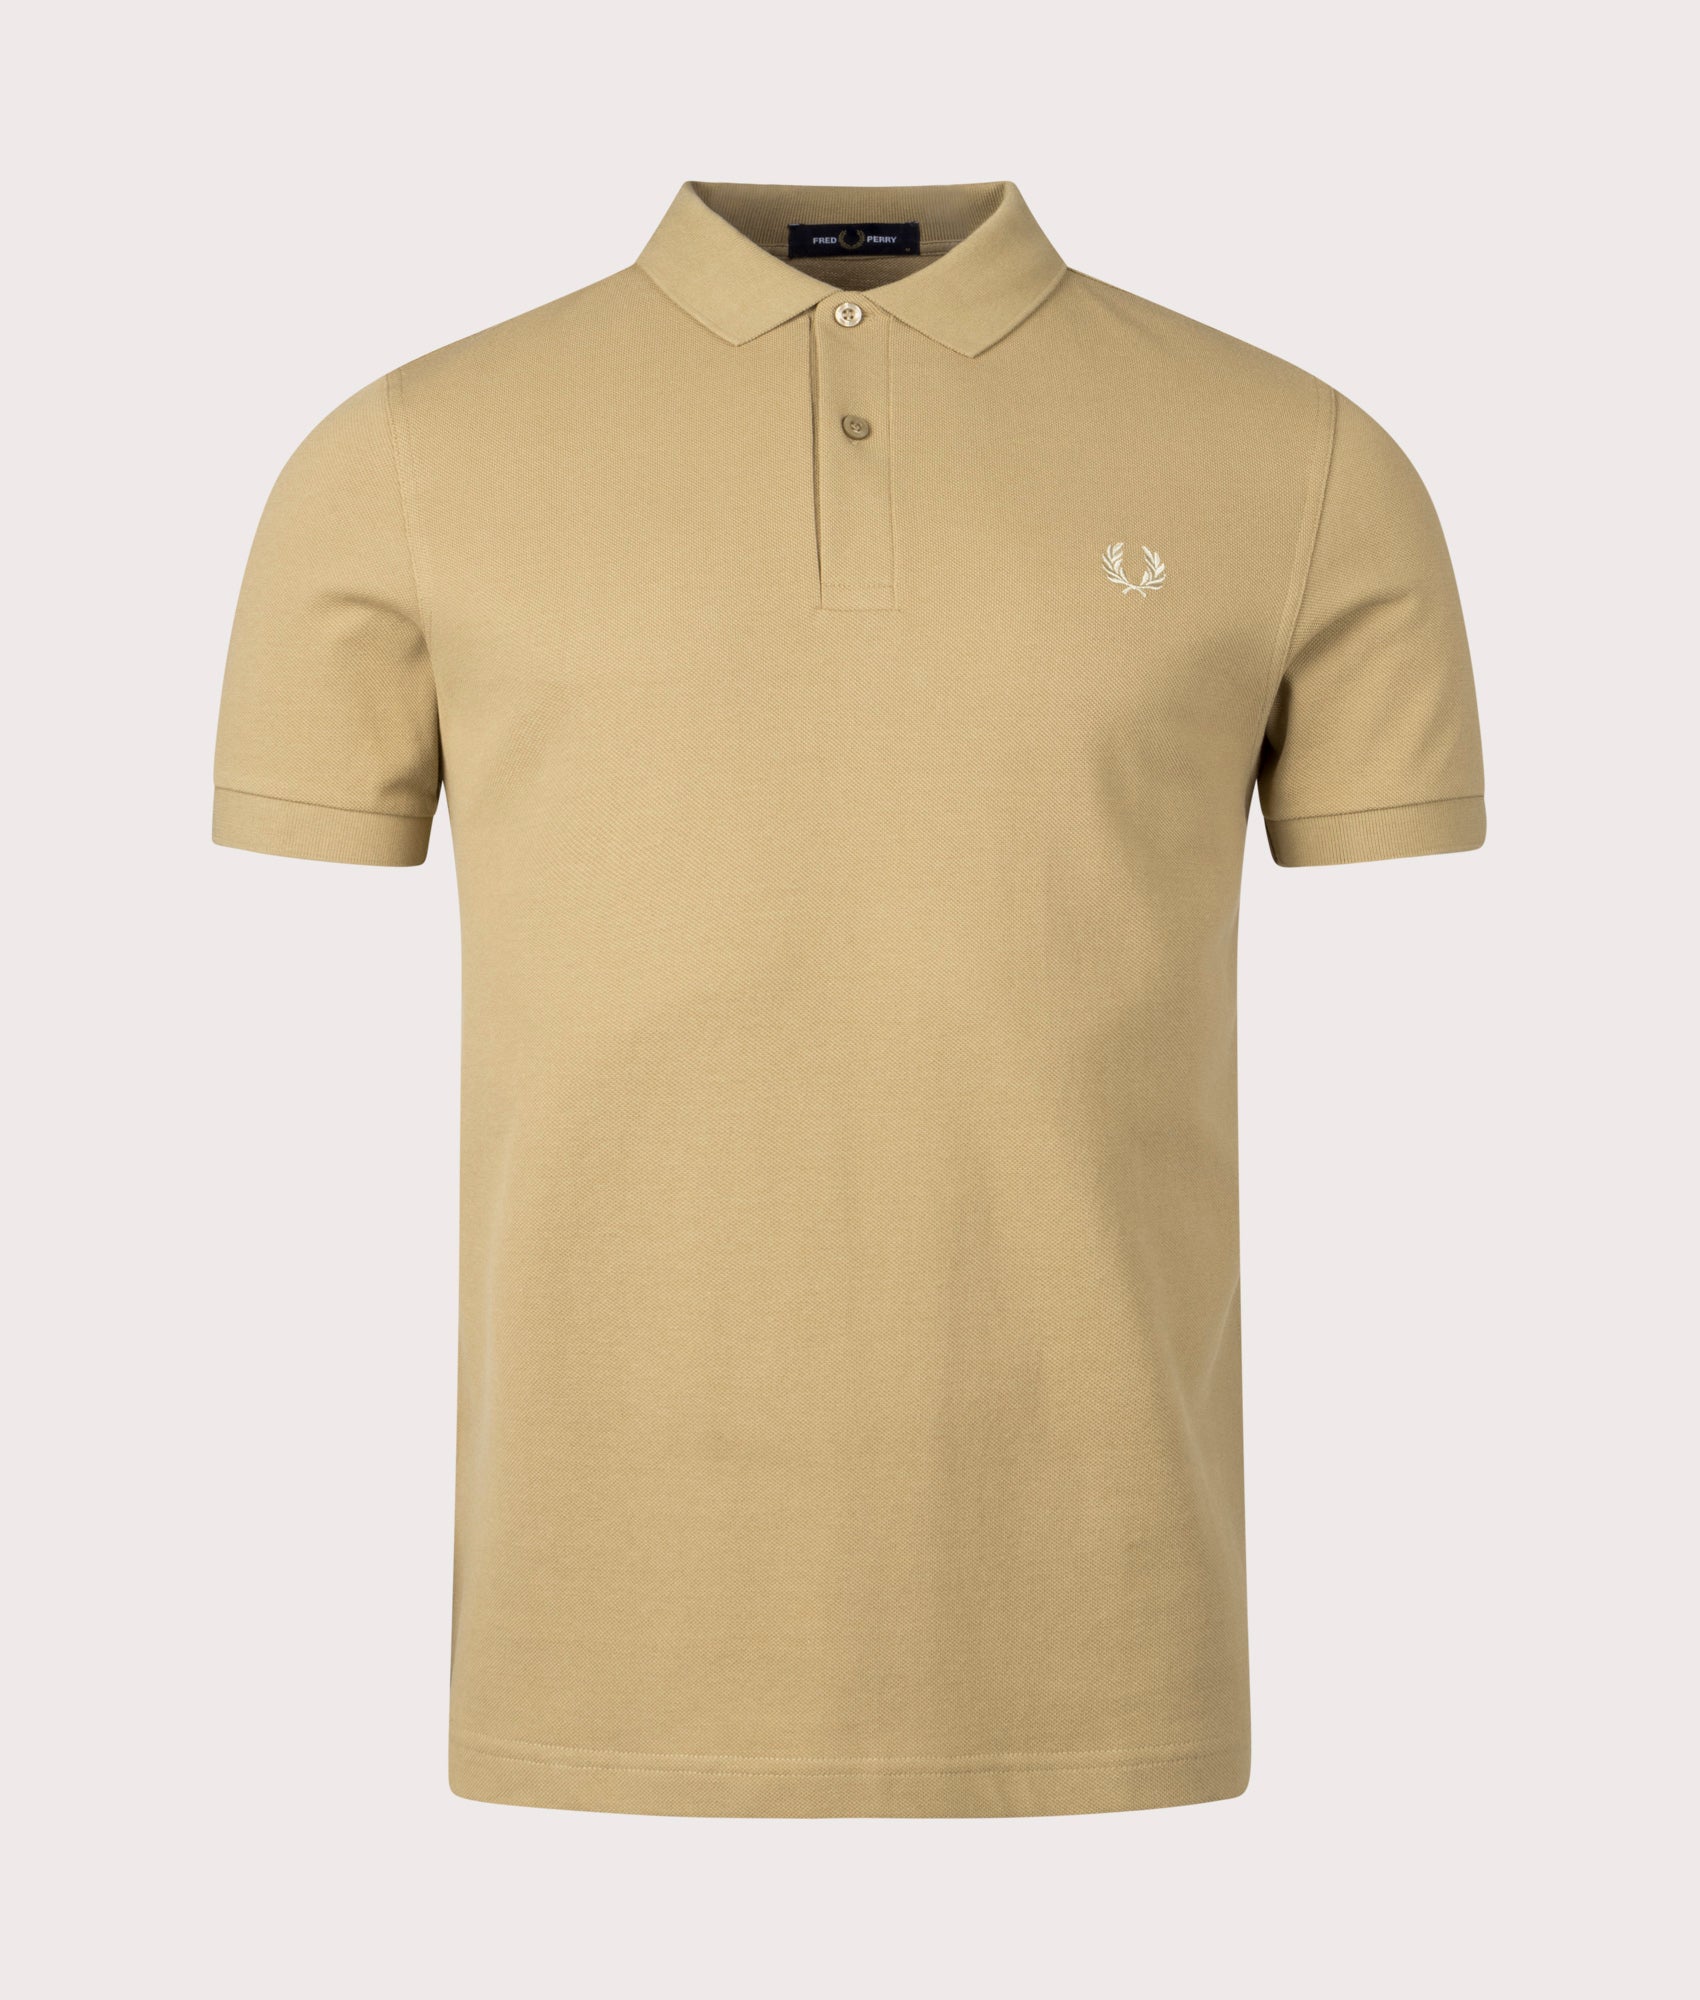 Fred Perry Mens Plain Fred Perry Polo Shirt - Colour: V19 Warm Stone/Oatmeal - Size: XXL